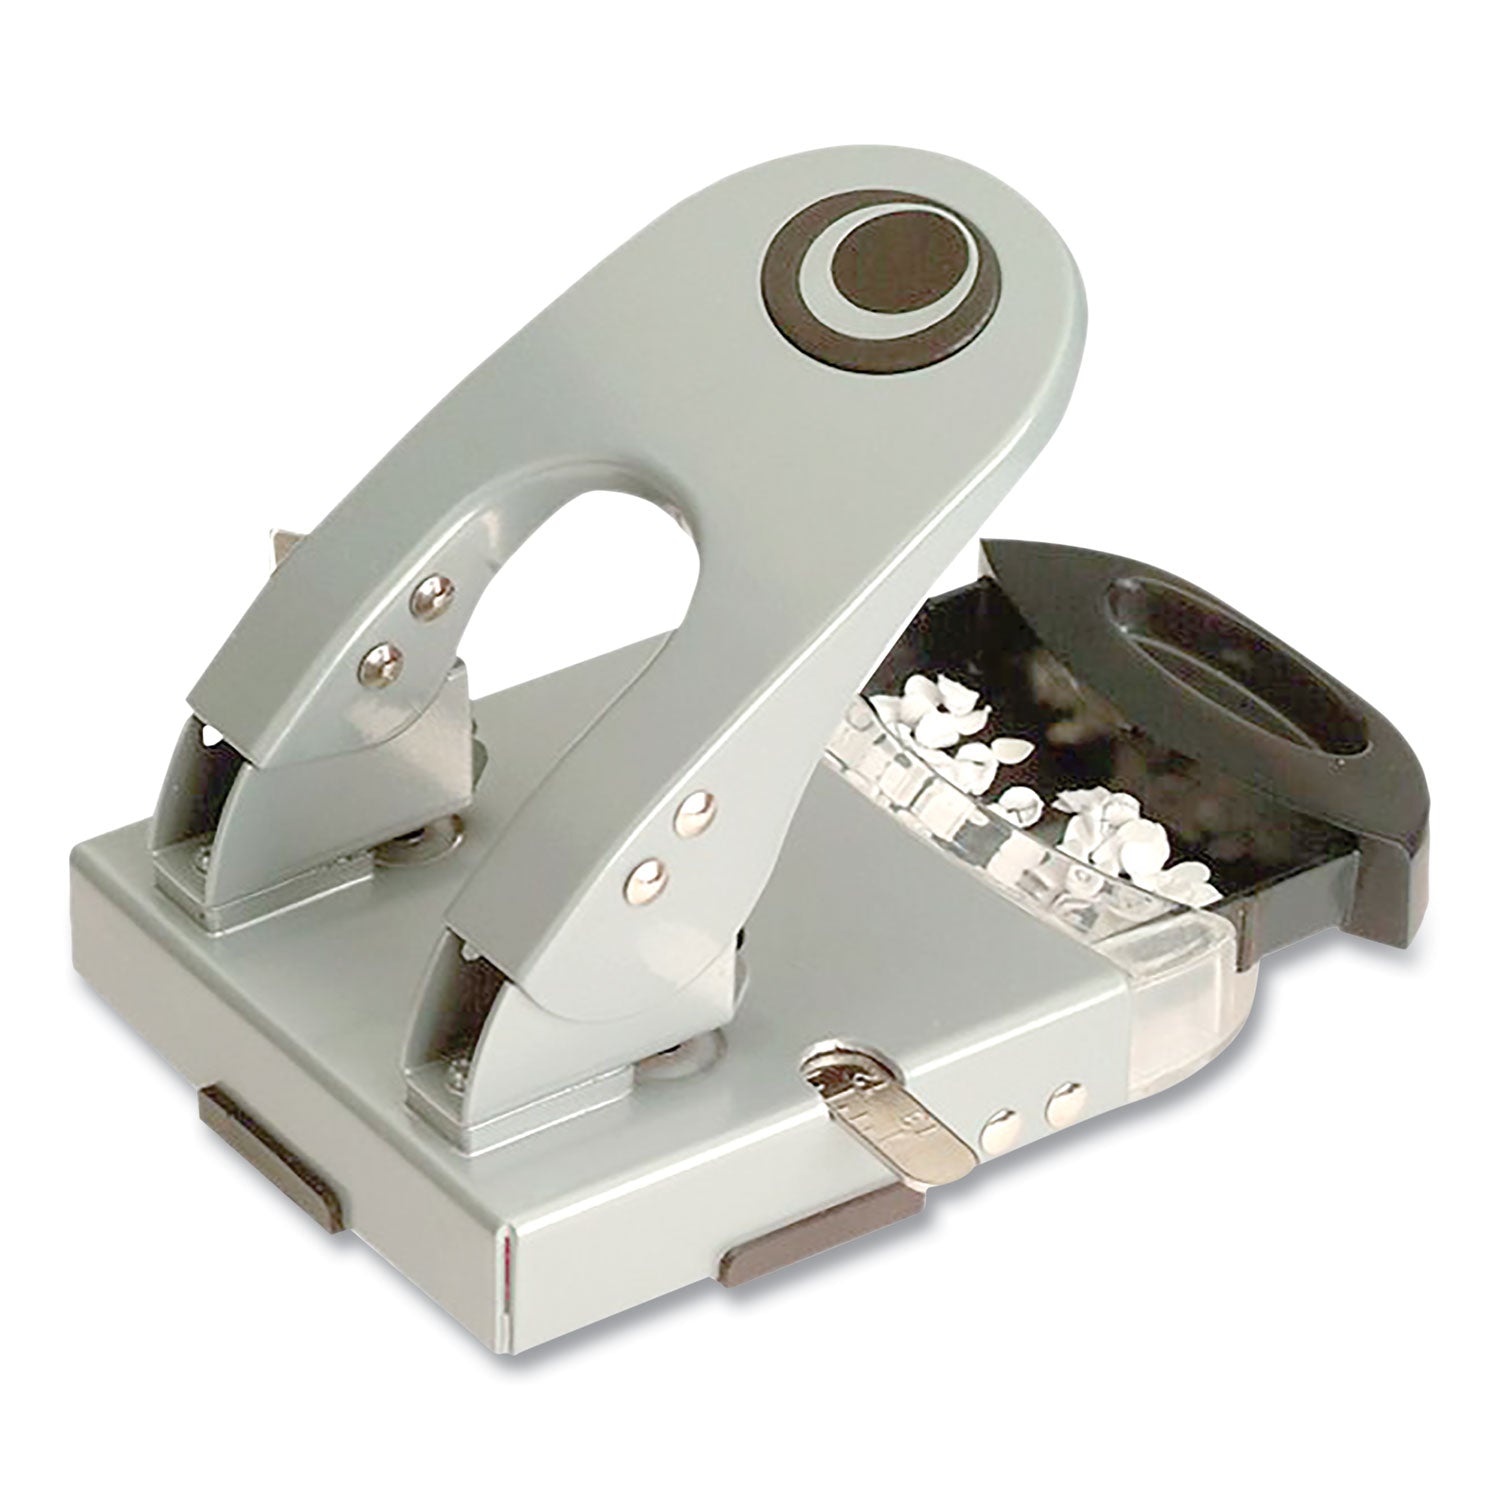 50-sheet-deluxe-two-hole-punch-1-4-holes-gray-blue_oic90101 - 2